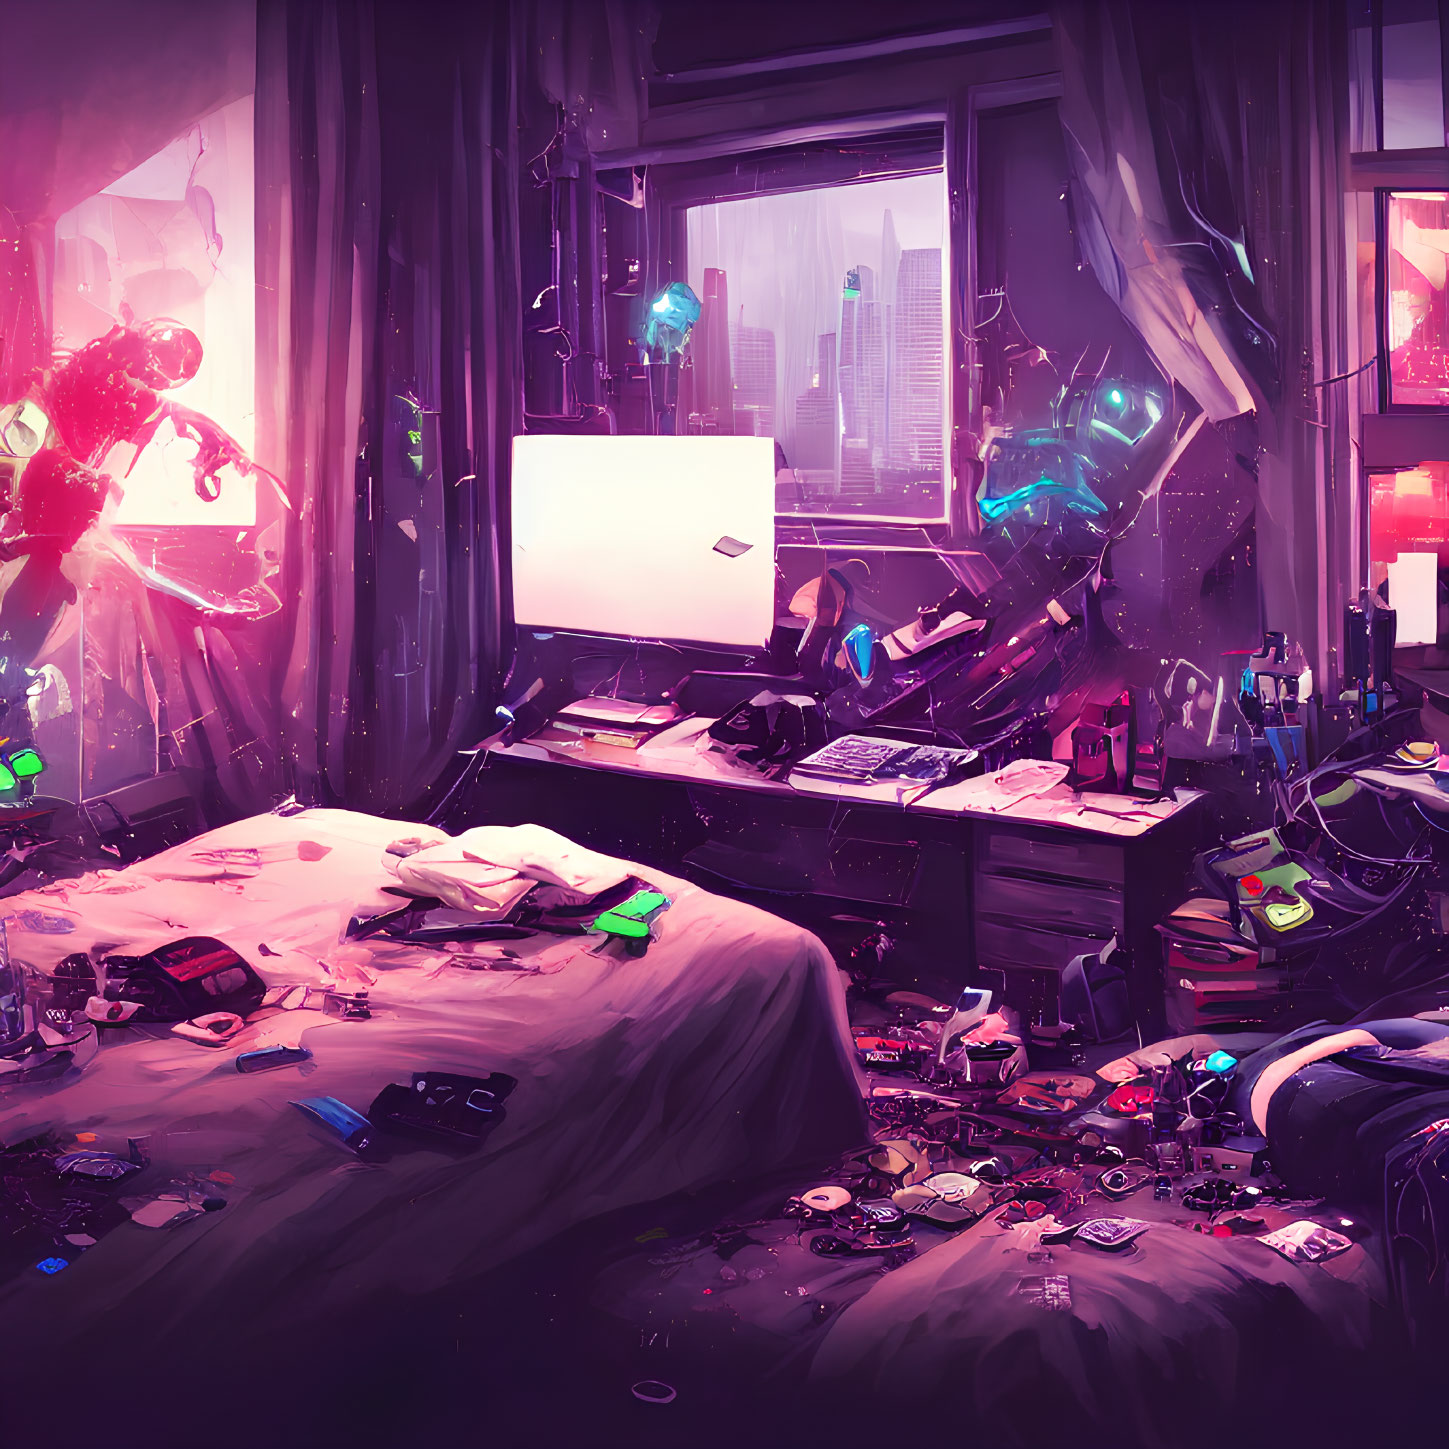 Futuristic cluttered bedroom with illuminated desk and holographic displays